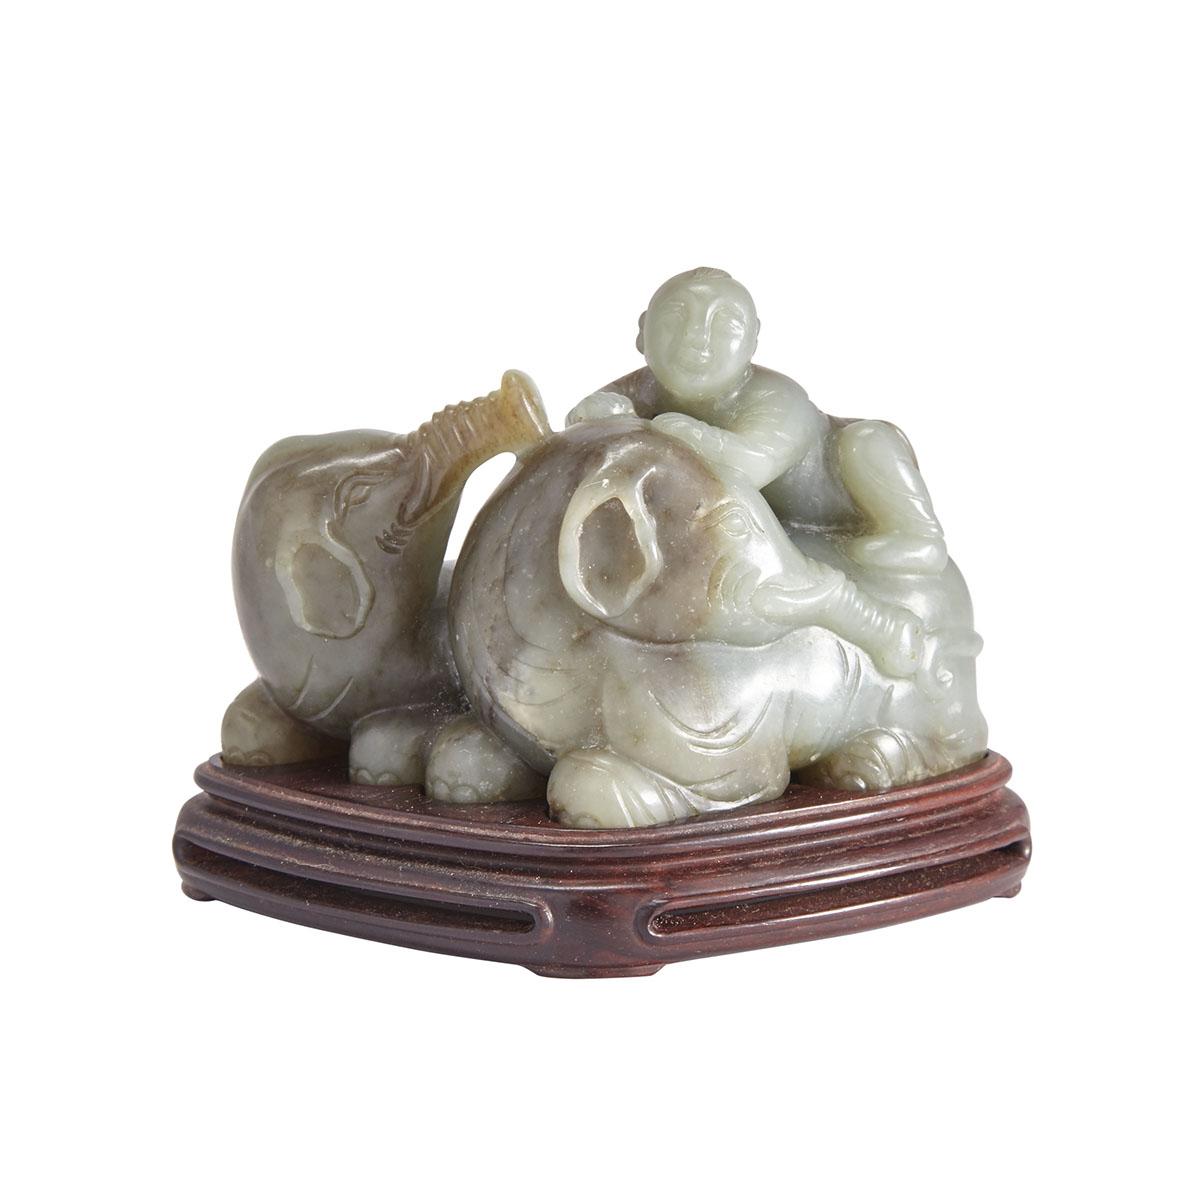 A JADE CARVING OF BOY AND ELEPHANTS WITH A ZITAN STAND, QING DYNASTY 清 童子洗象玉擺件 原配紫檀座 Of reseda green